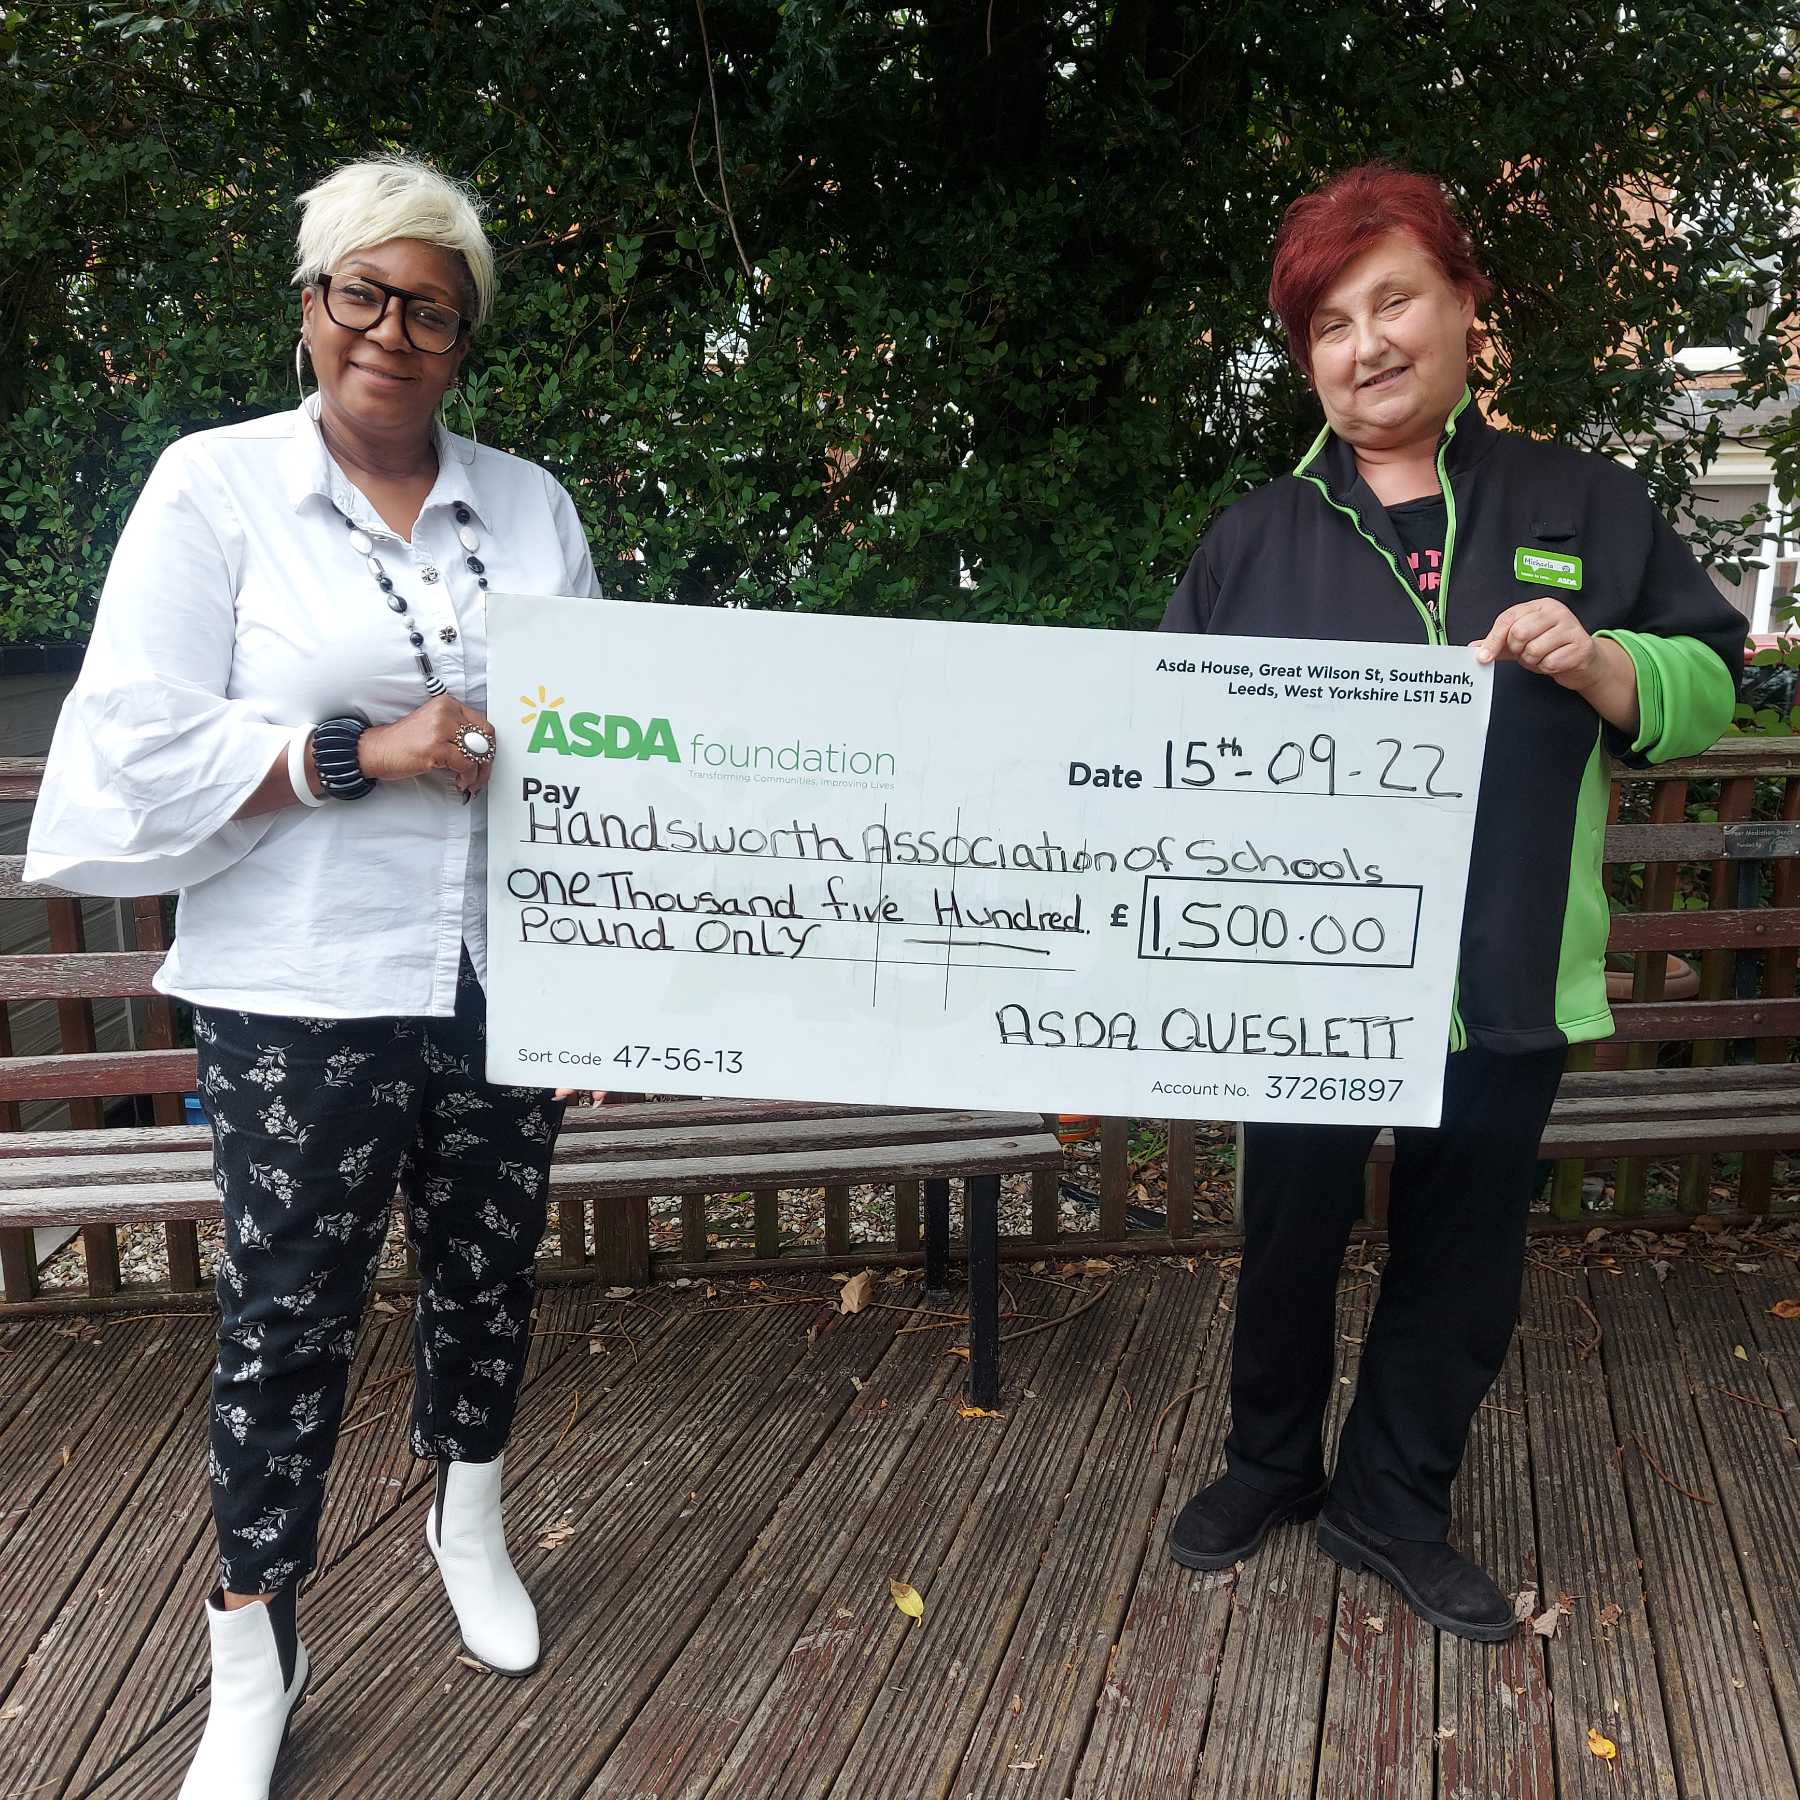 image for the story called Thank you to the ASDA Foundation